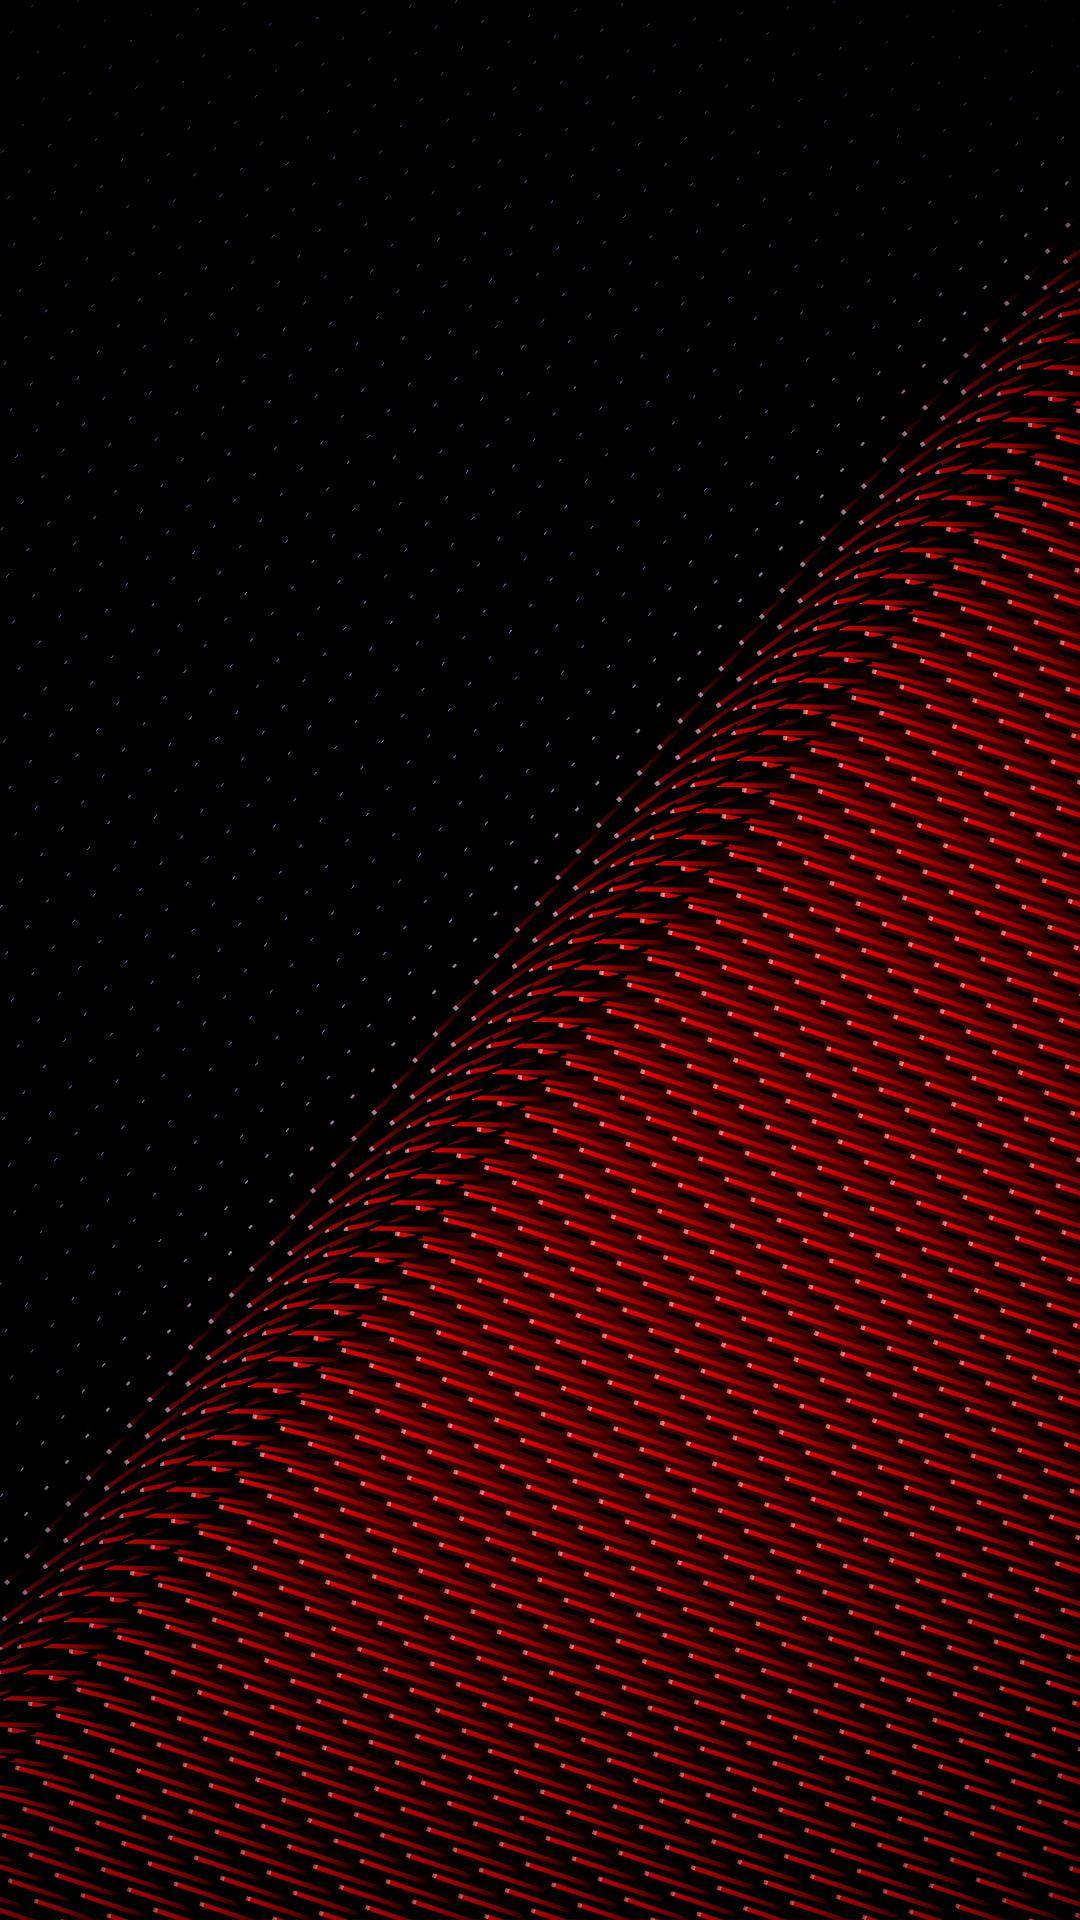 Red and black digital wallpaper, black background, abstract